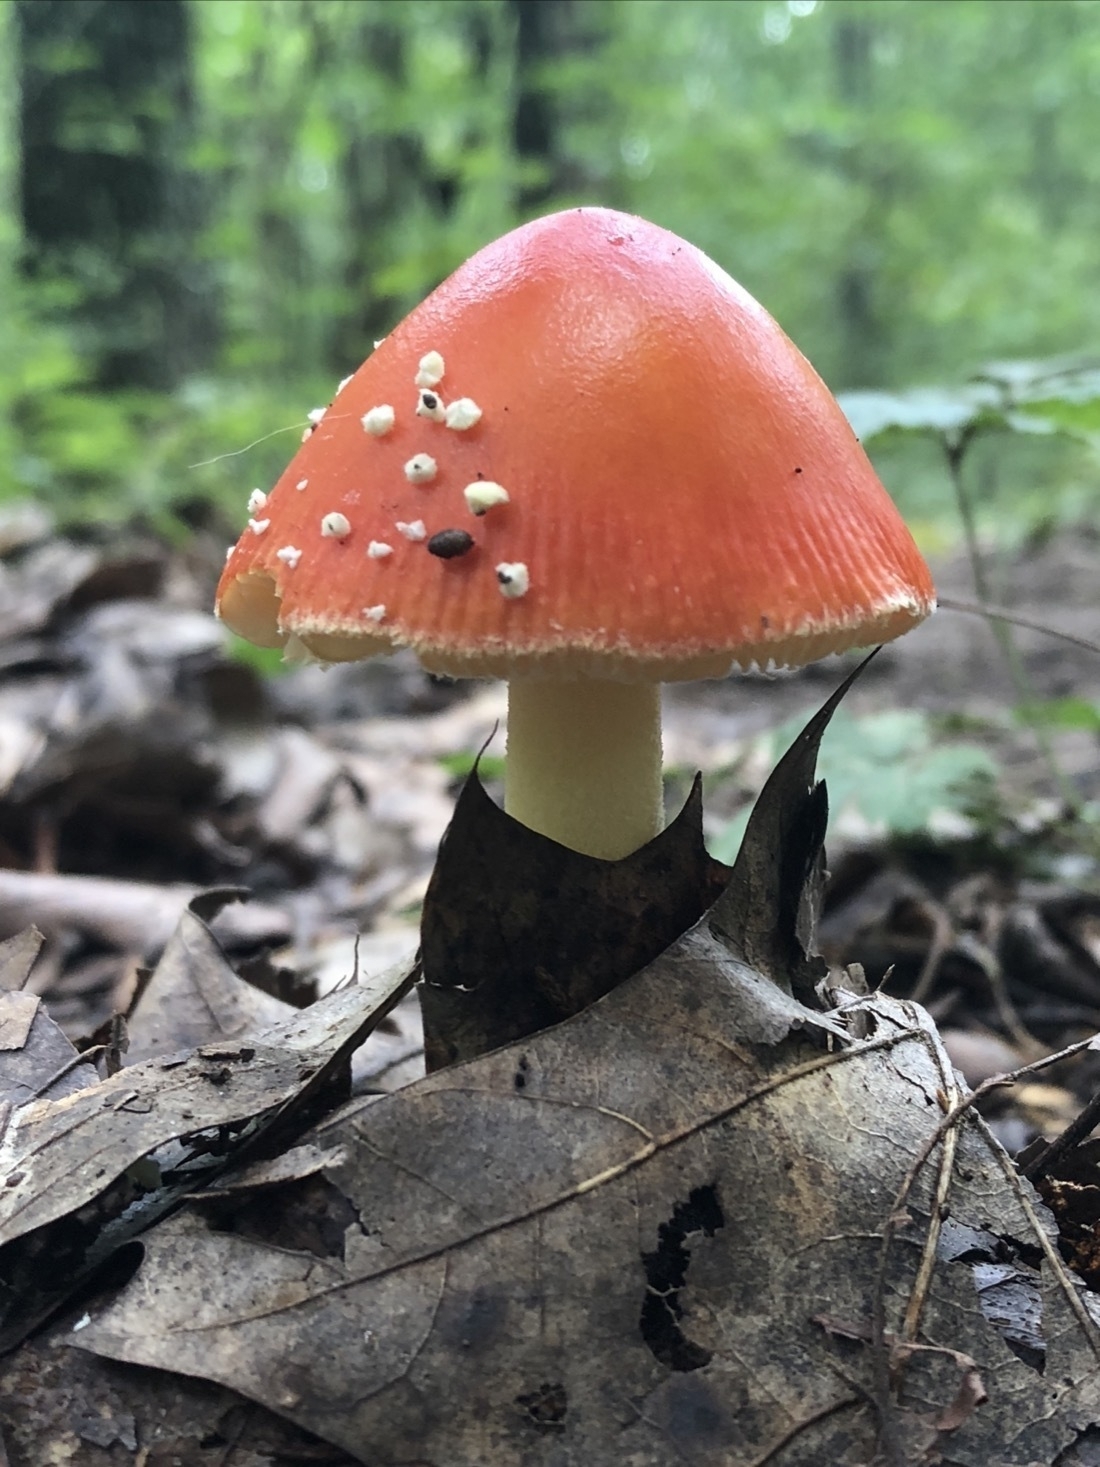 a red mushroom with a white stem growing out of the forest floor